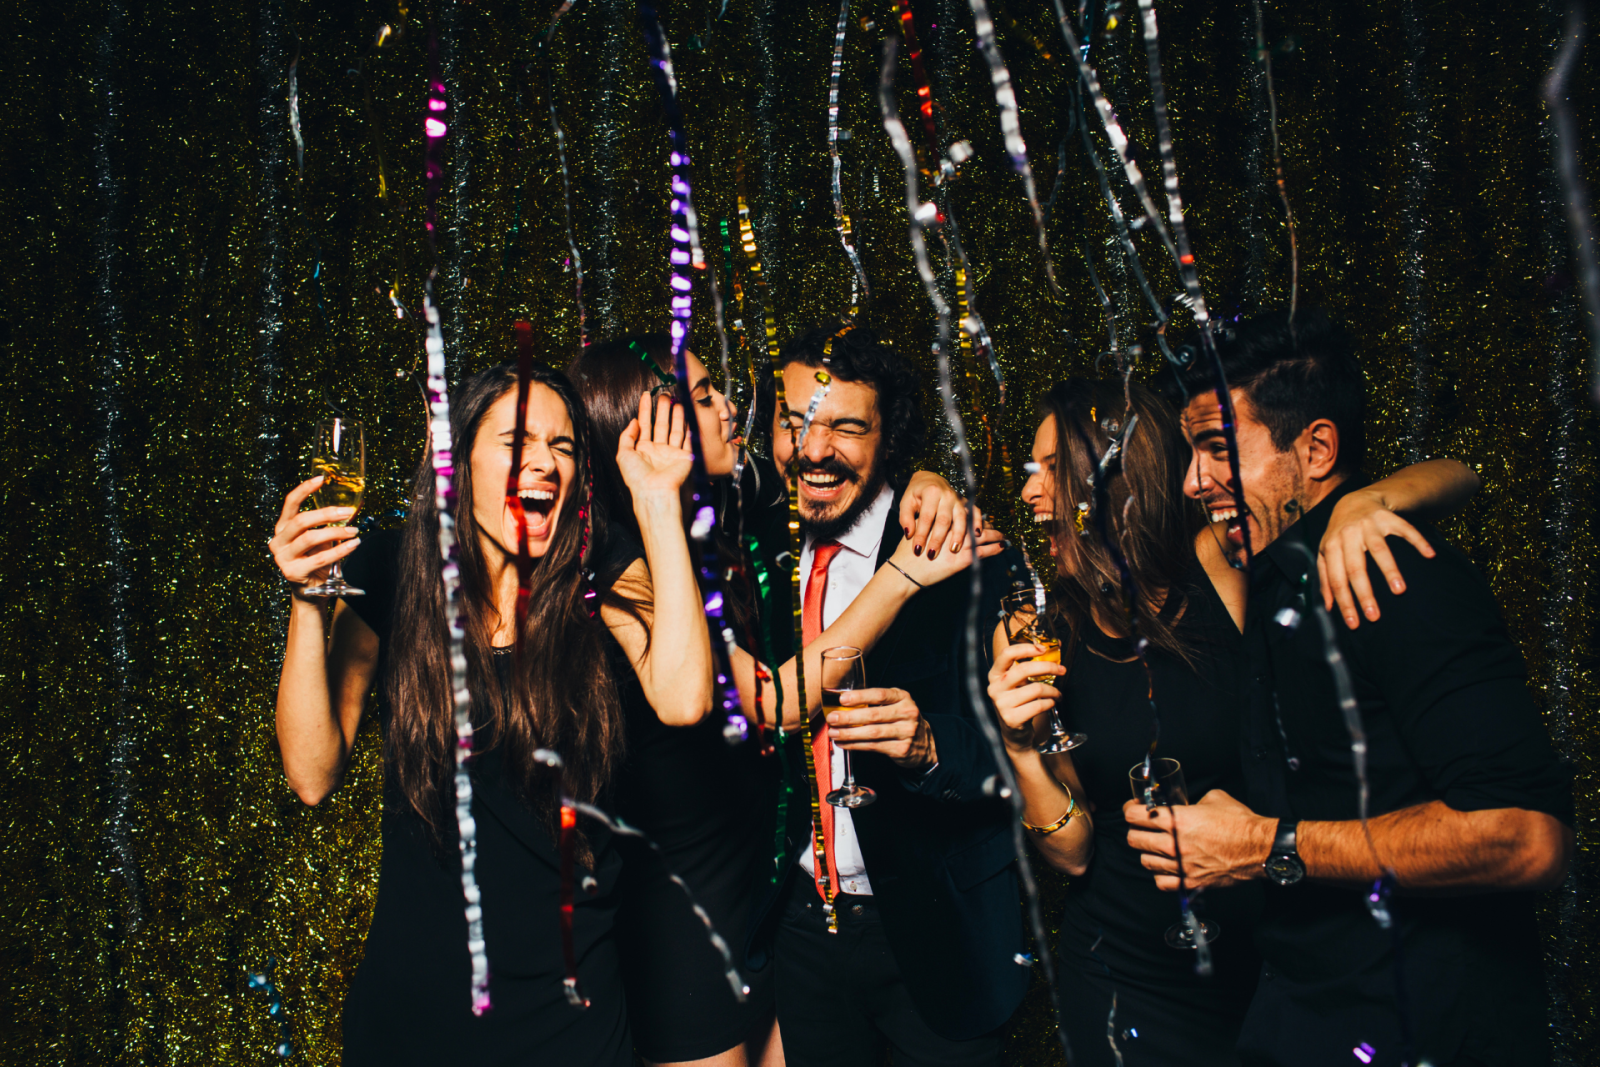 People partying at a New Year’s Eve cannabis party